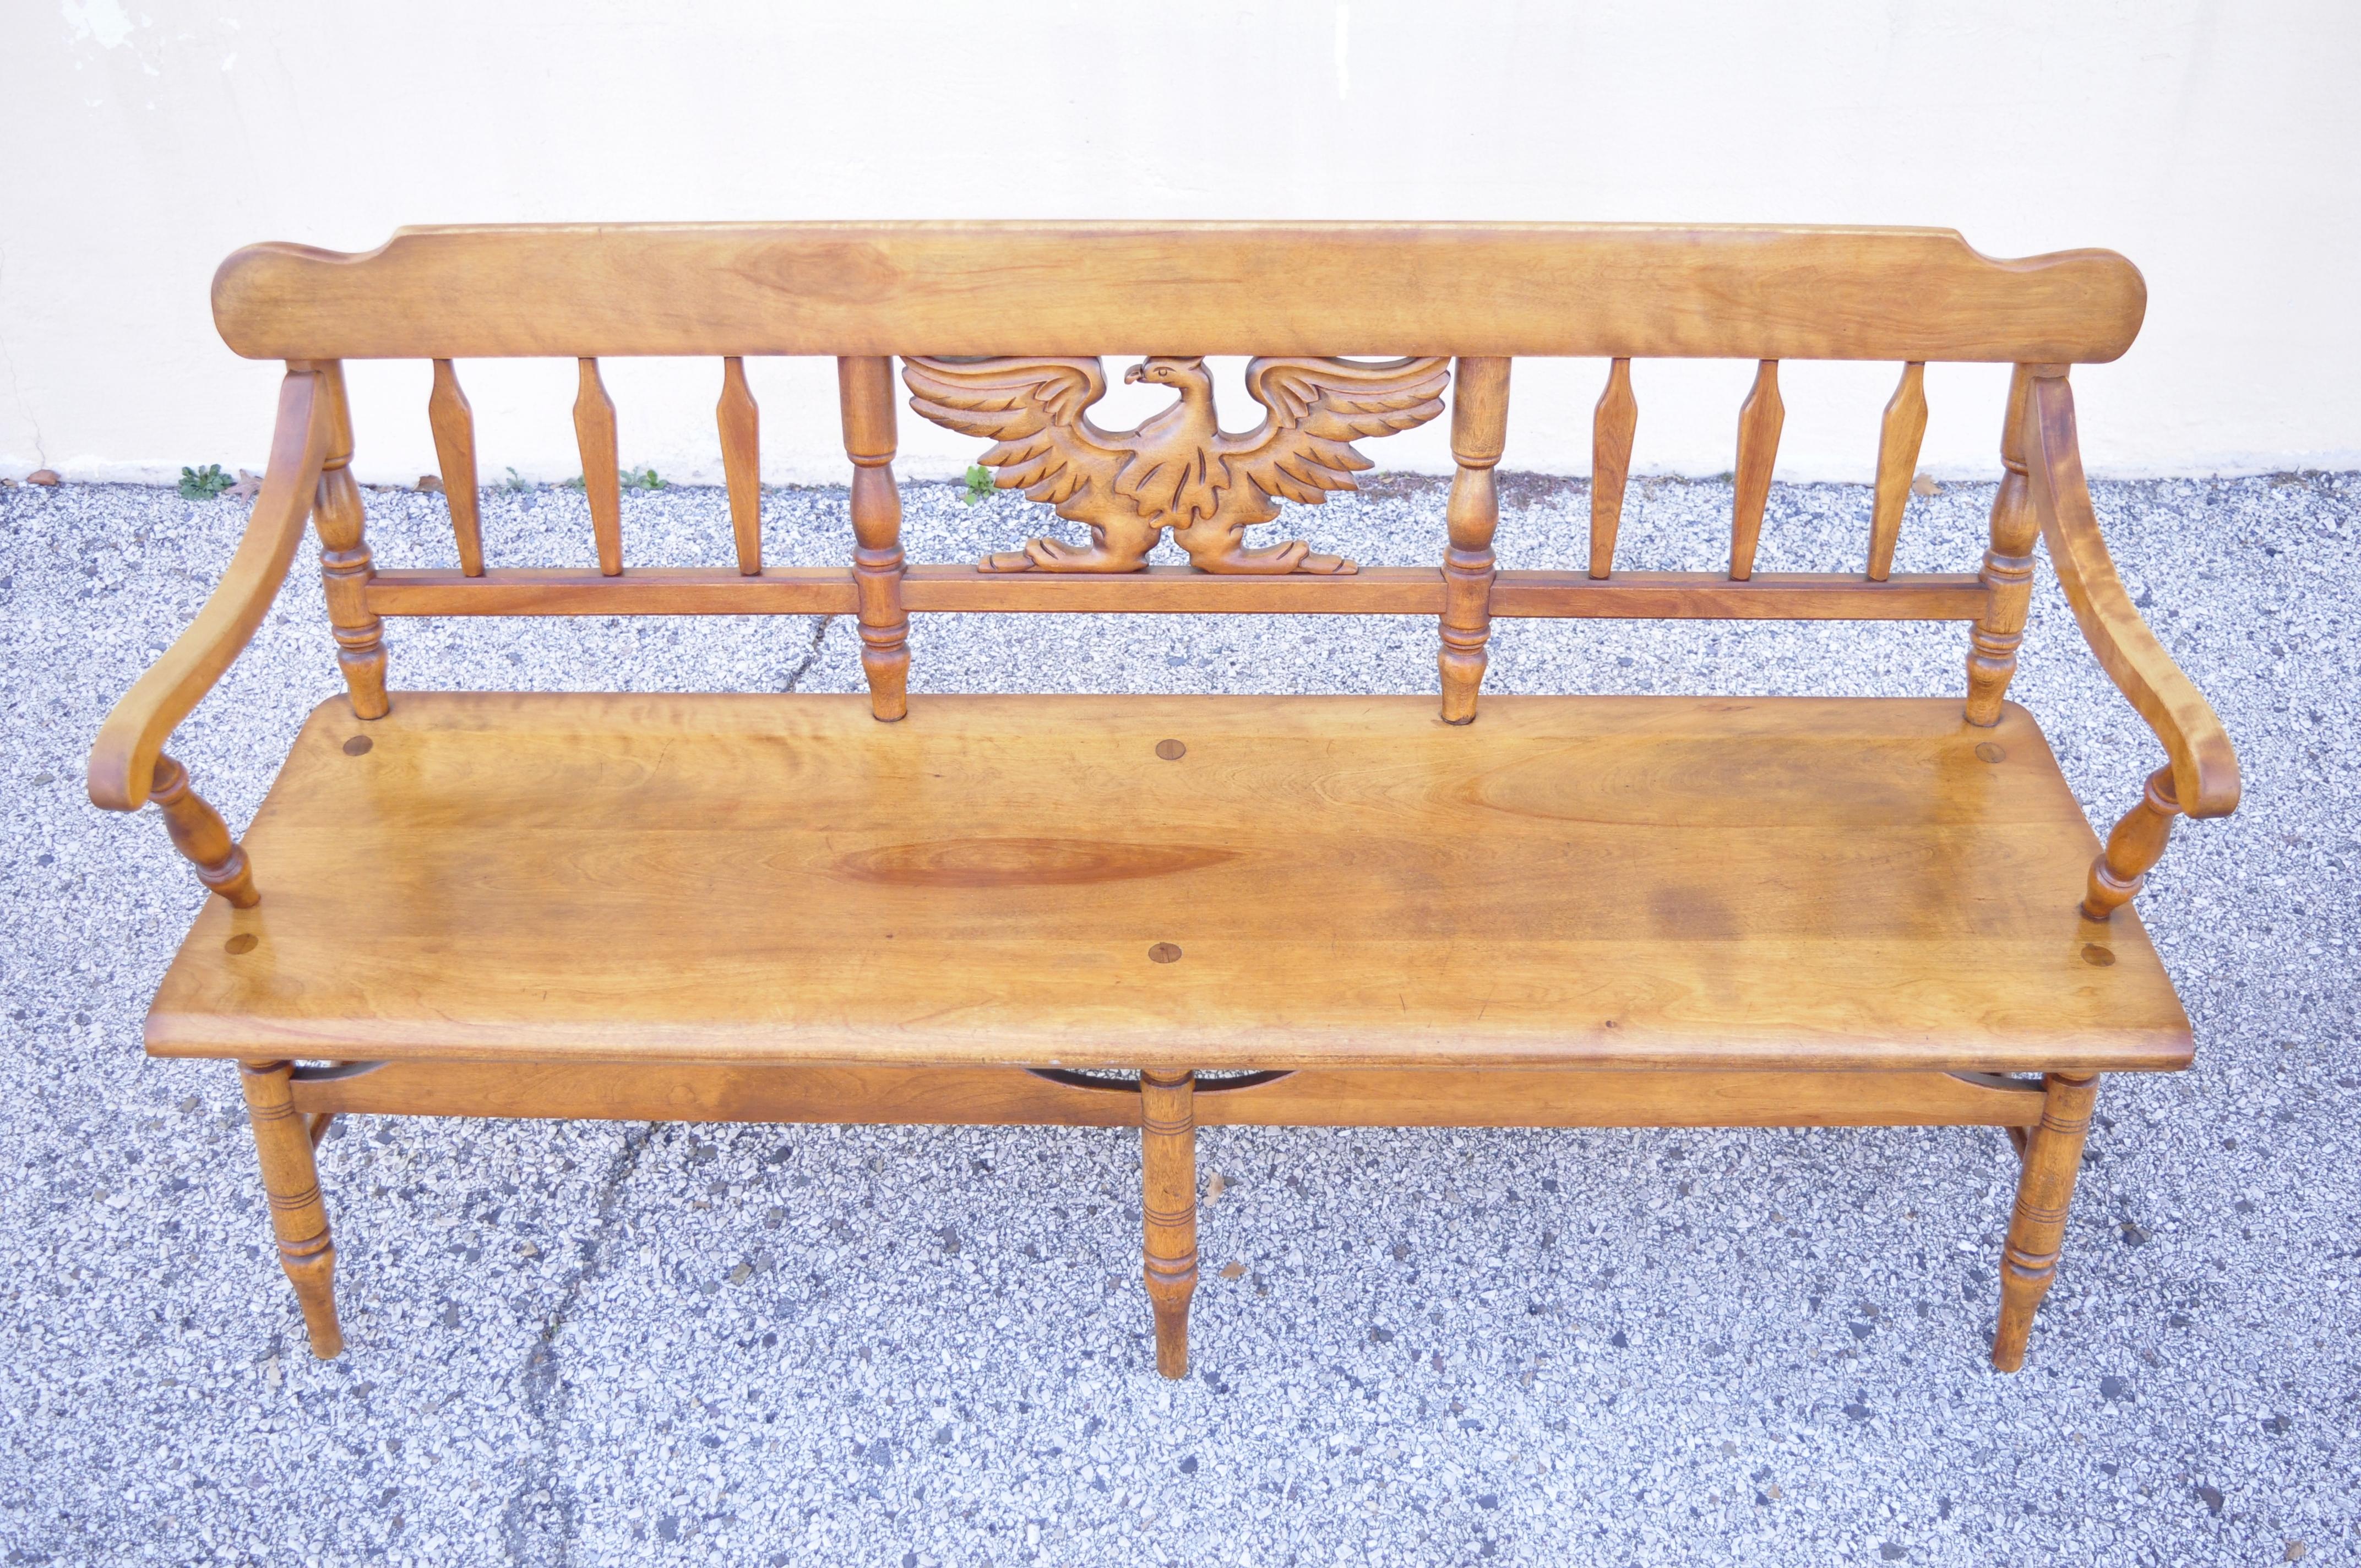 Vintage Cushman Maple Wood Settee Bench Carved Eagle Back Deacons Bench For Sale 3